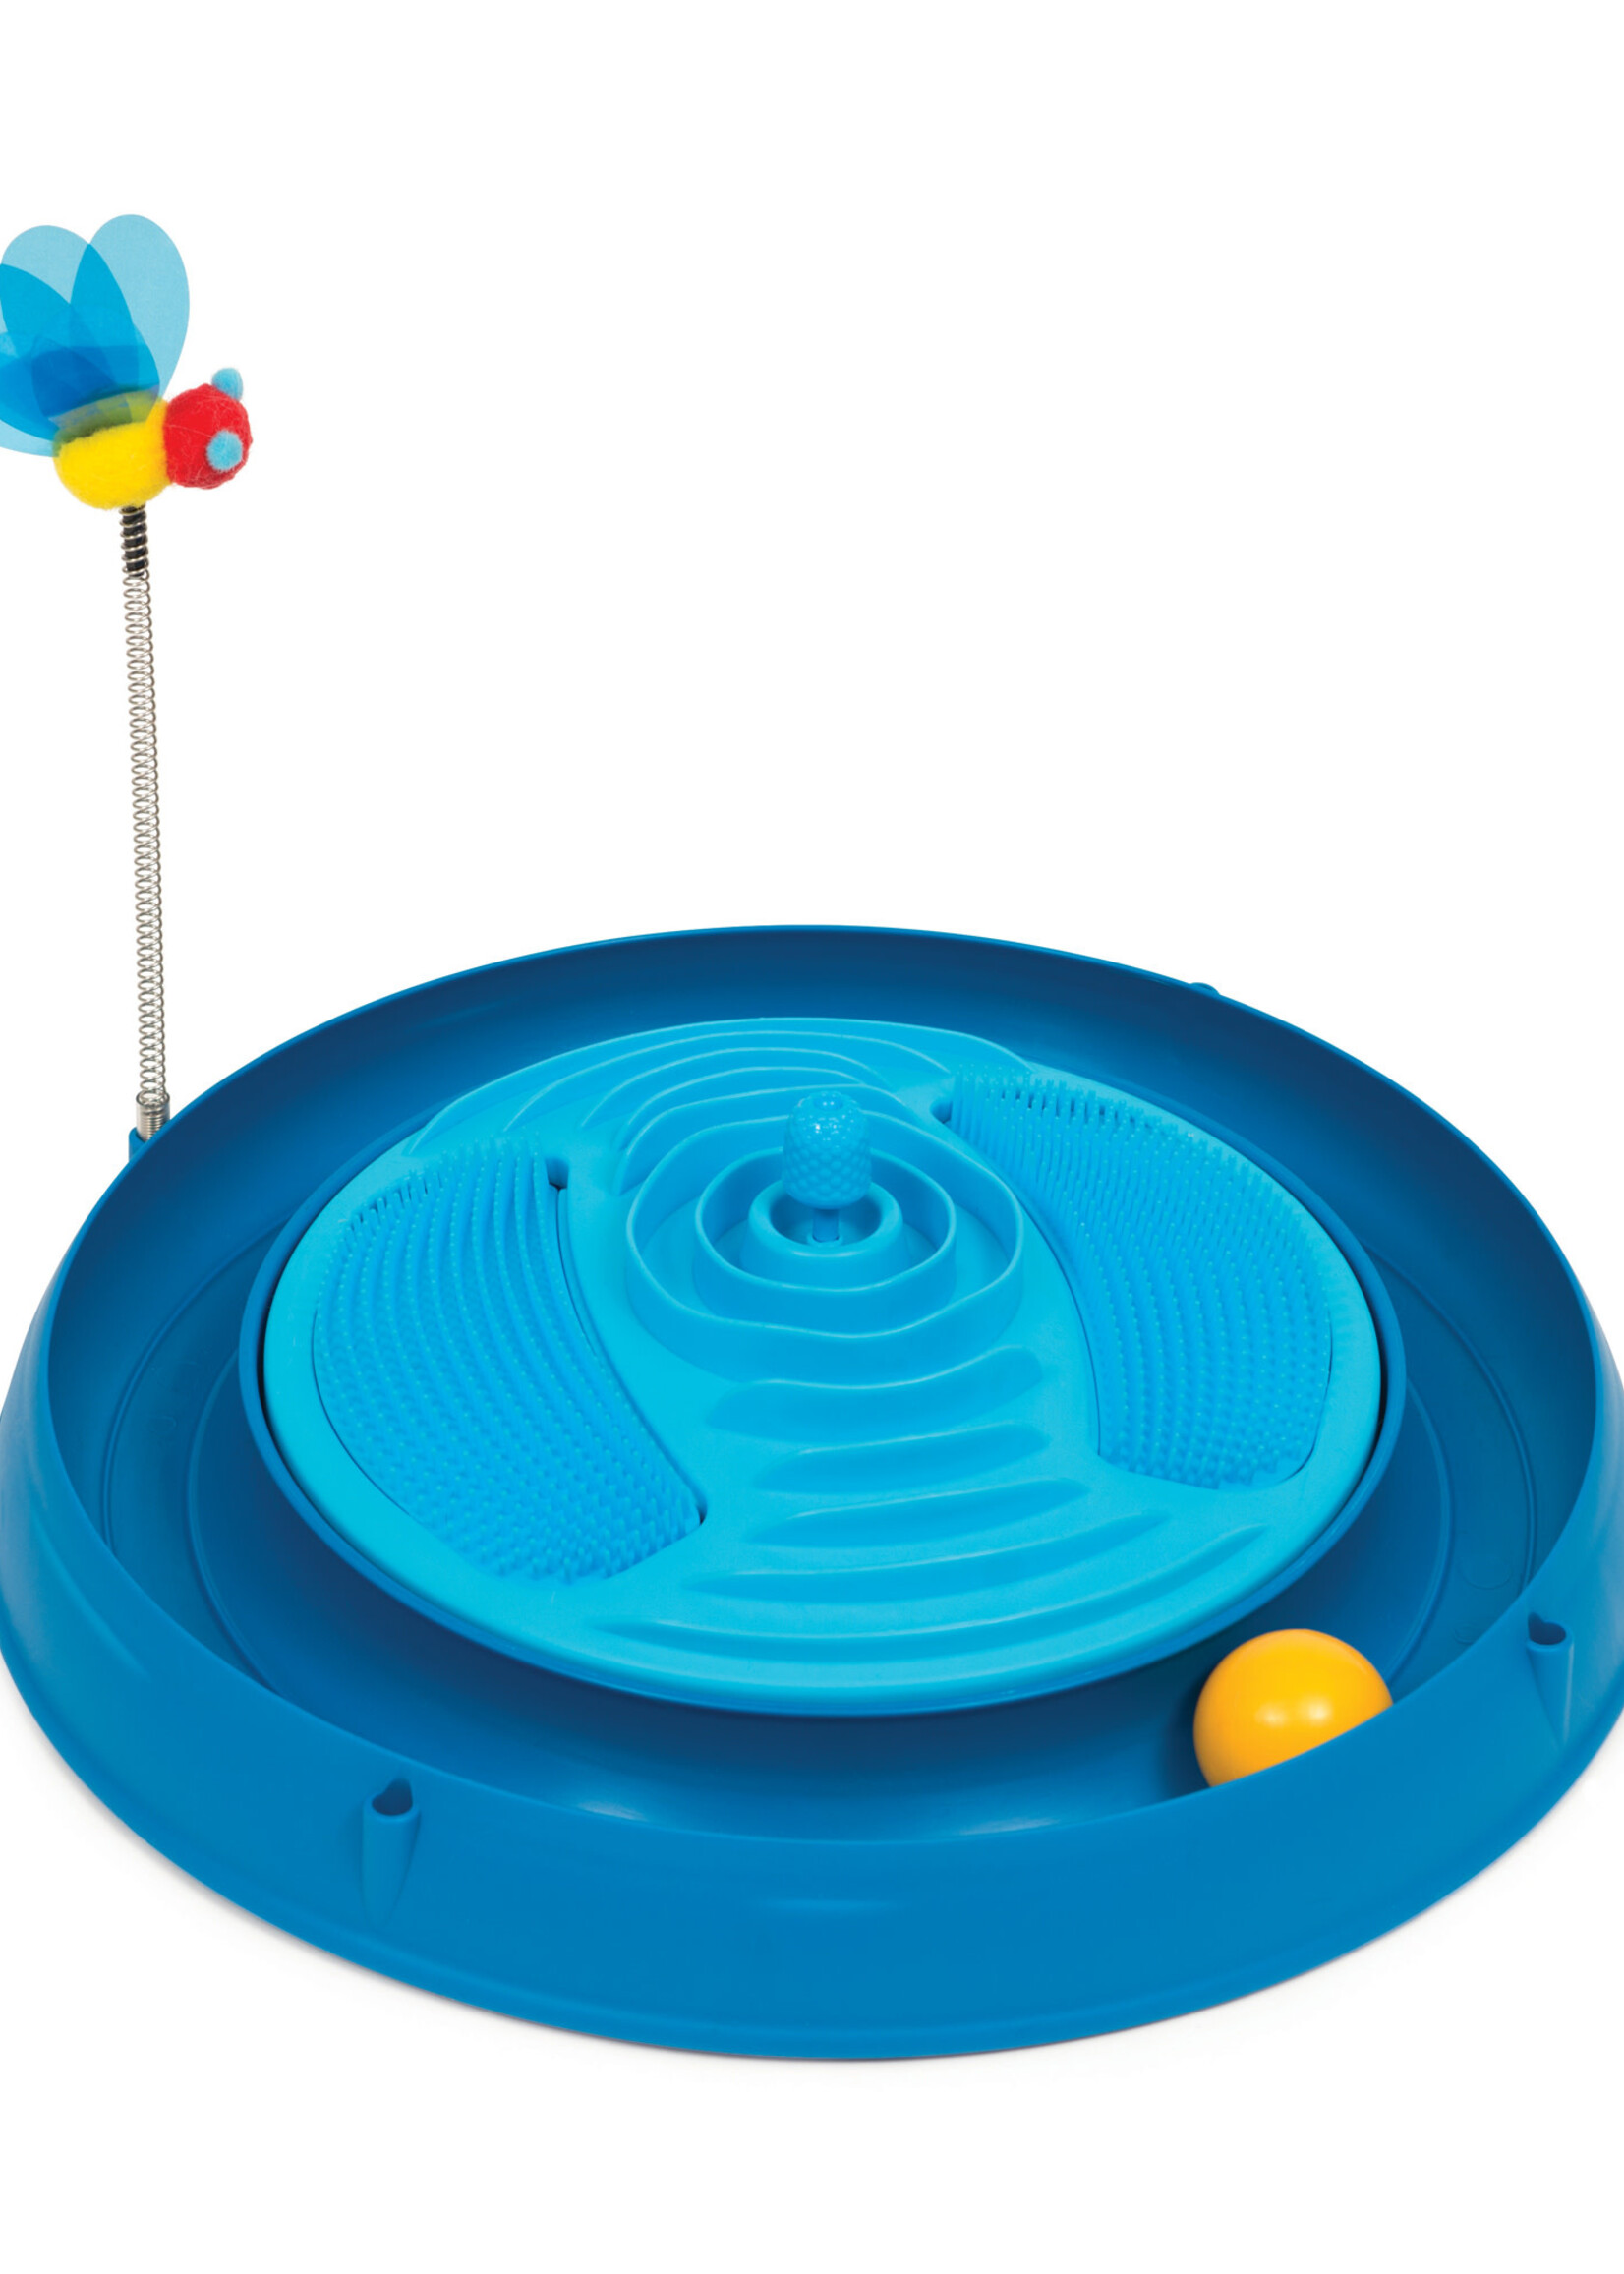 CT - Catit 2.0 CA Play - Massager, Bee, and Ball-Blue